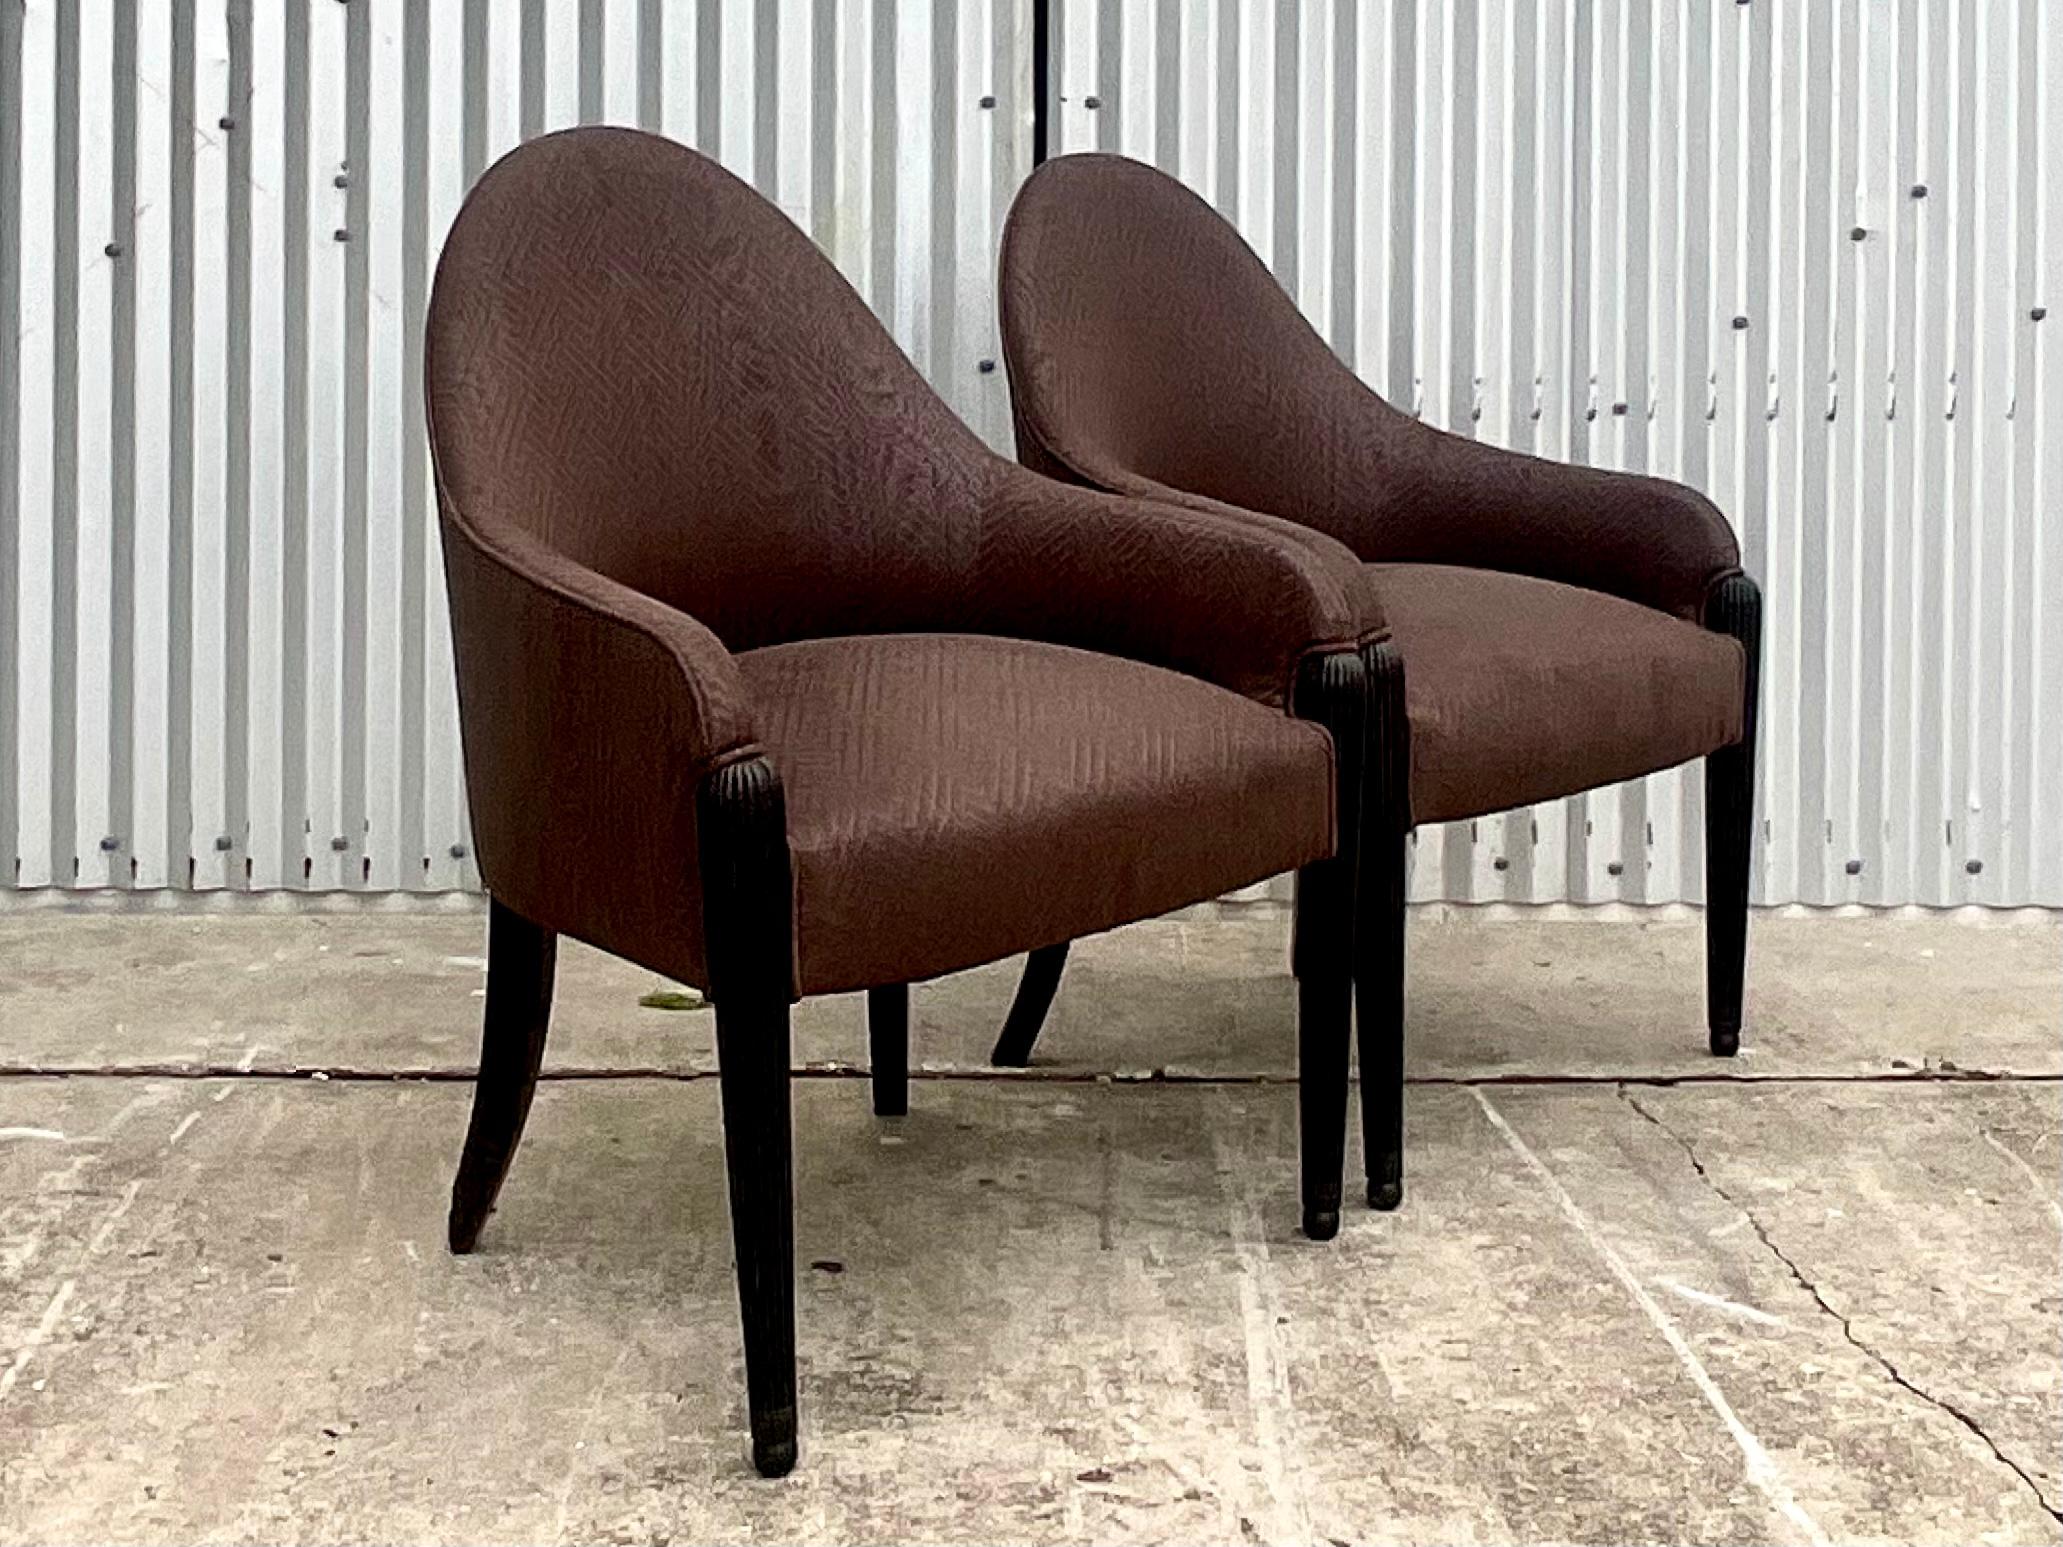 Fantastic pair of vintage quilted brown side chairs. A beautiful sloped high back gives these chairs a distinctive Postmodern look. Done in the manner of the iconic Donghia. Acquired from a Palm Beach estate.